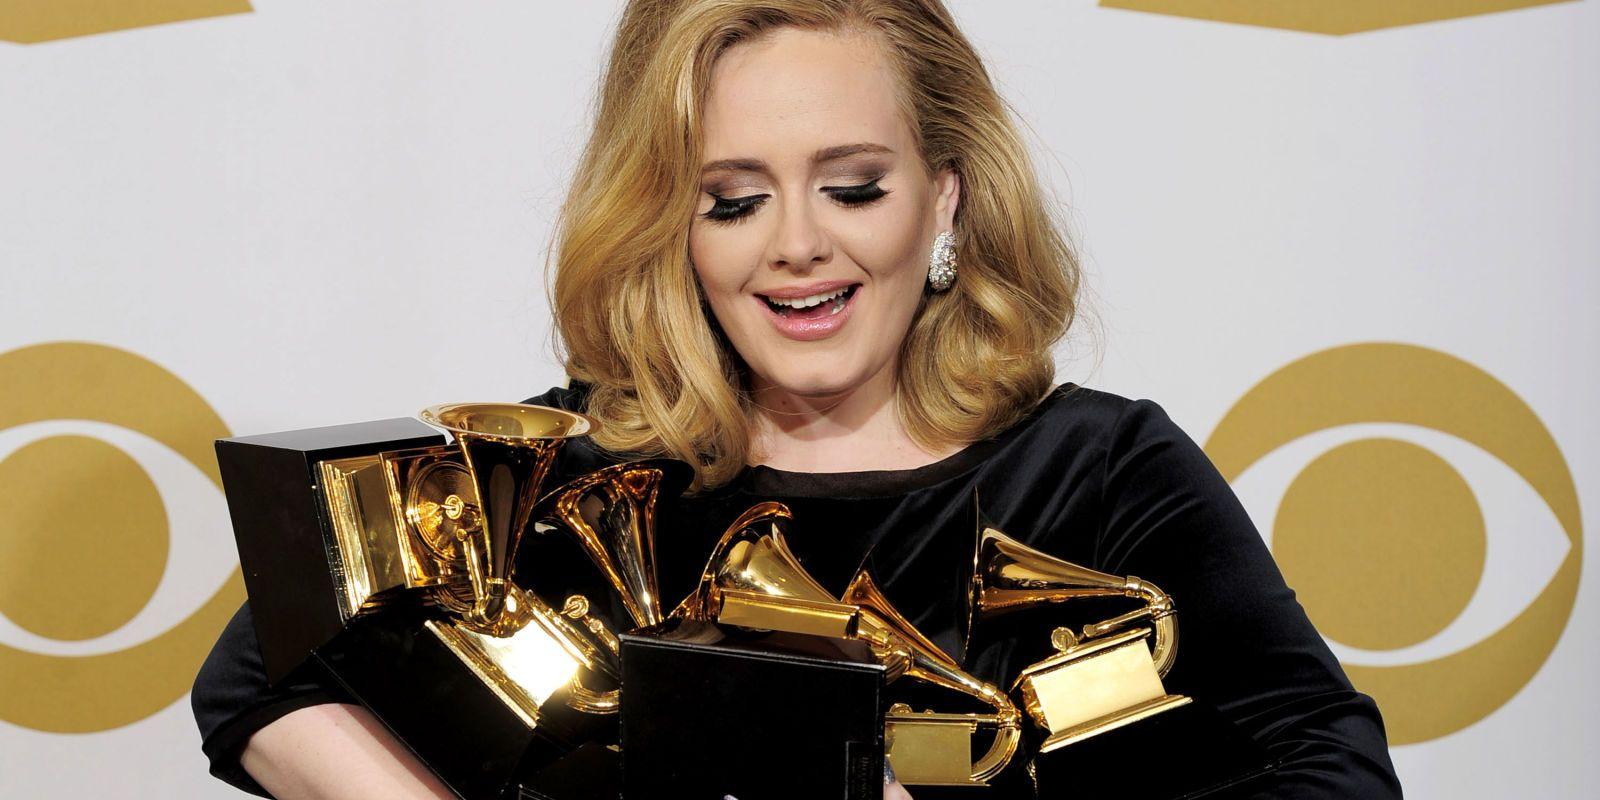 Before you cry, 'Snubbed!' Adele isn't eligible for next year's